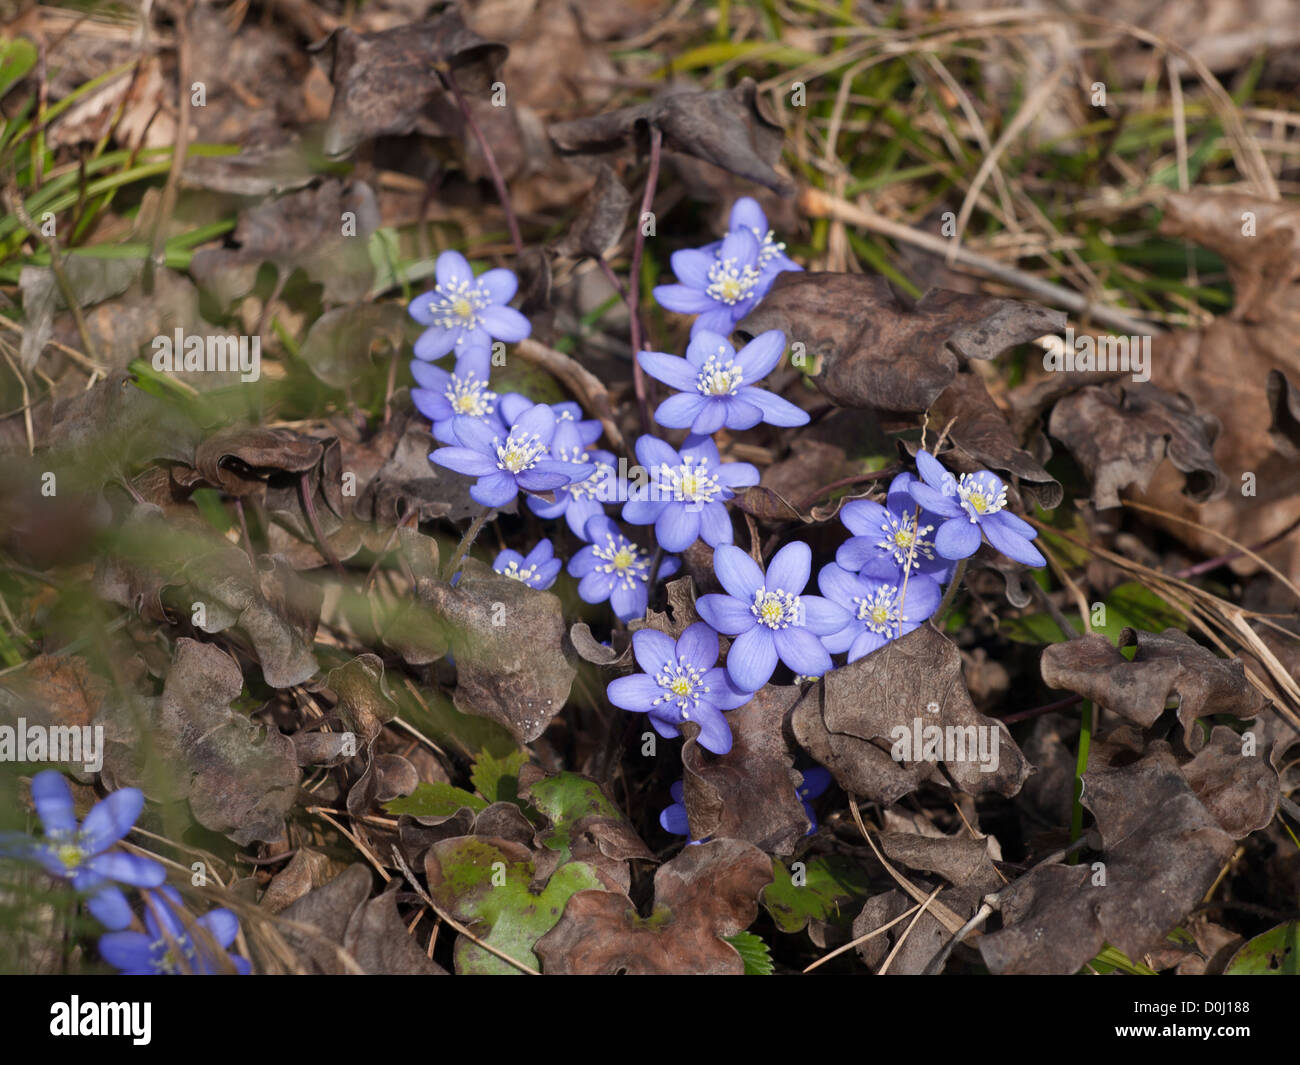 Anemone hepatica, liverwort or pennywort, a wonder of springtime emerging from under dead leaves in Oslo Norway Stock Photo